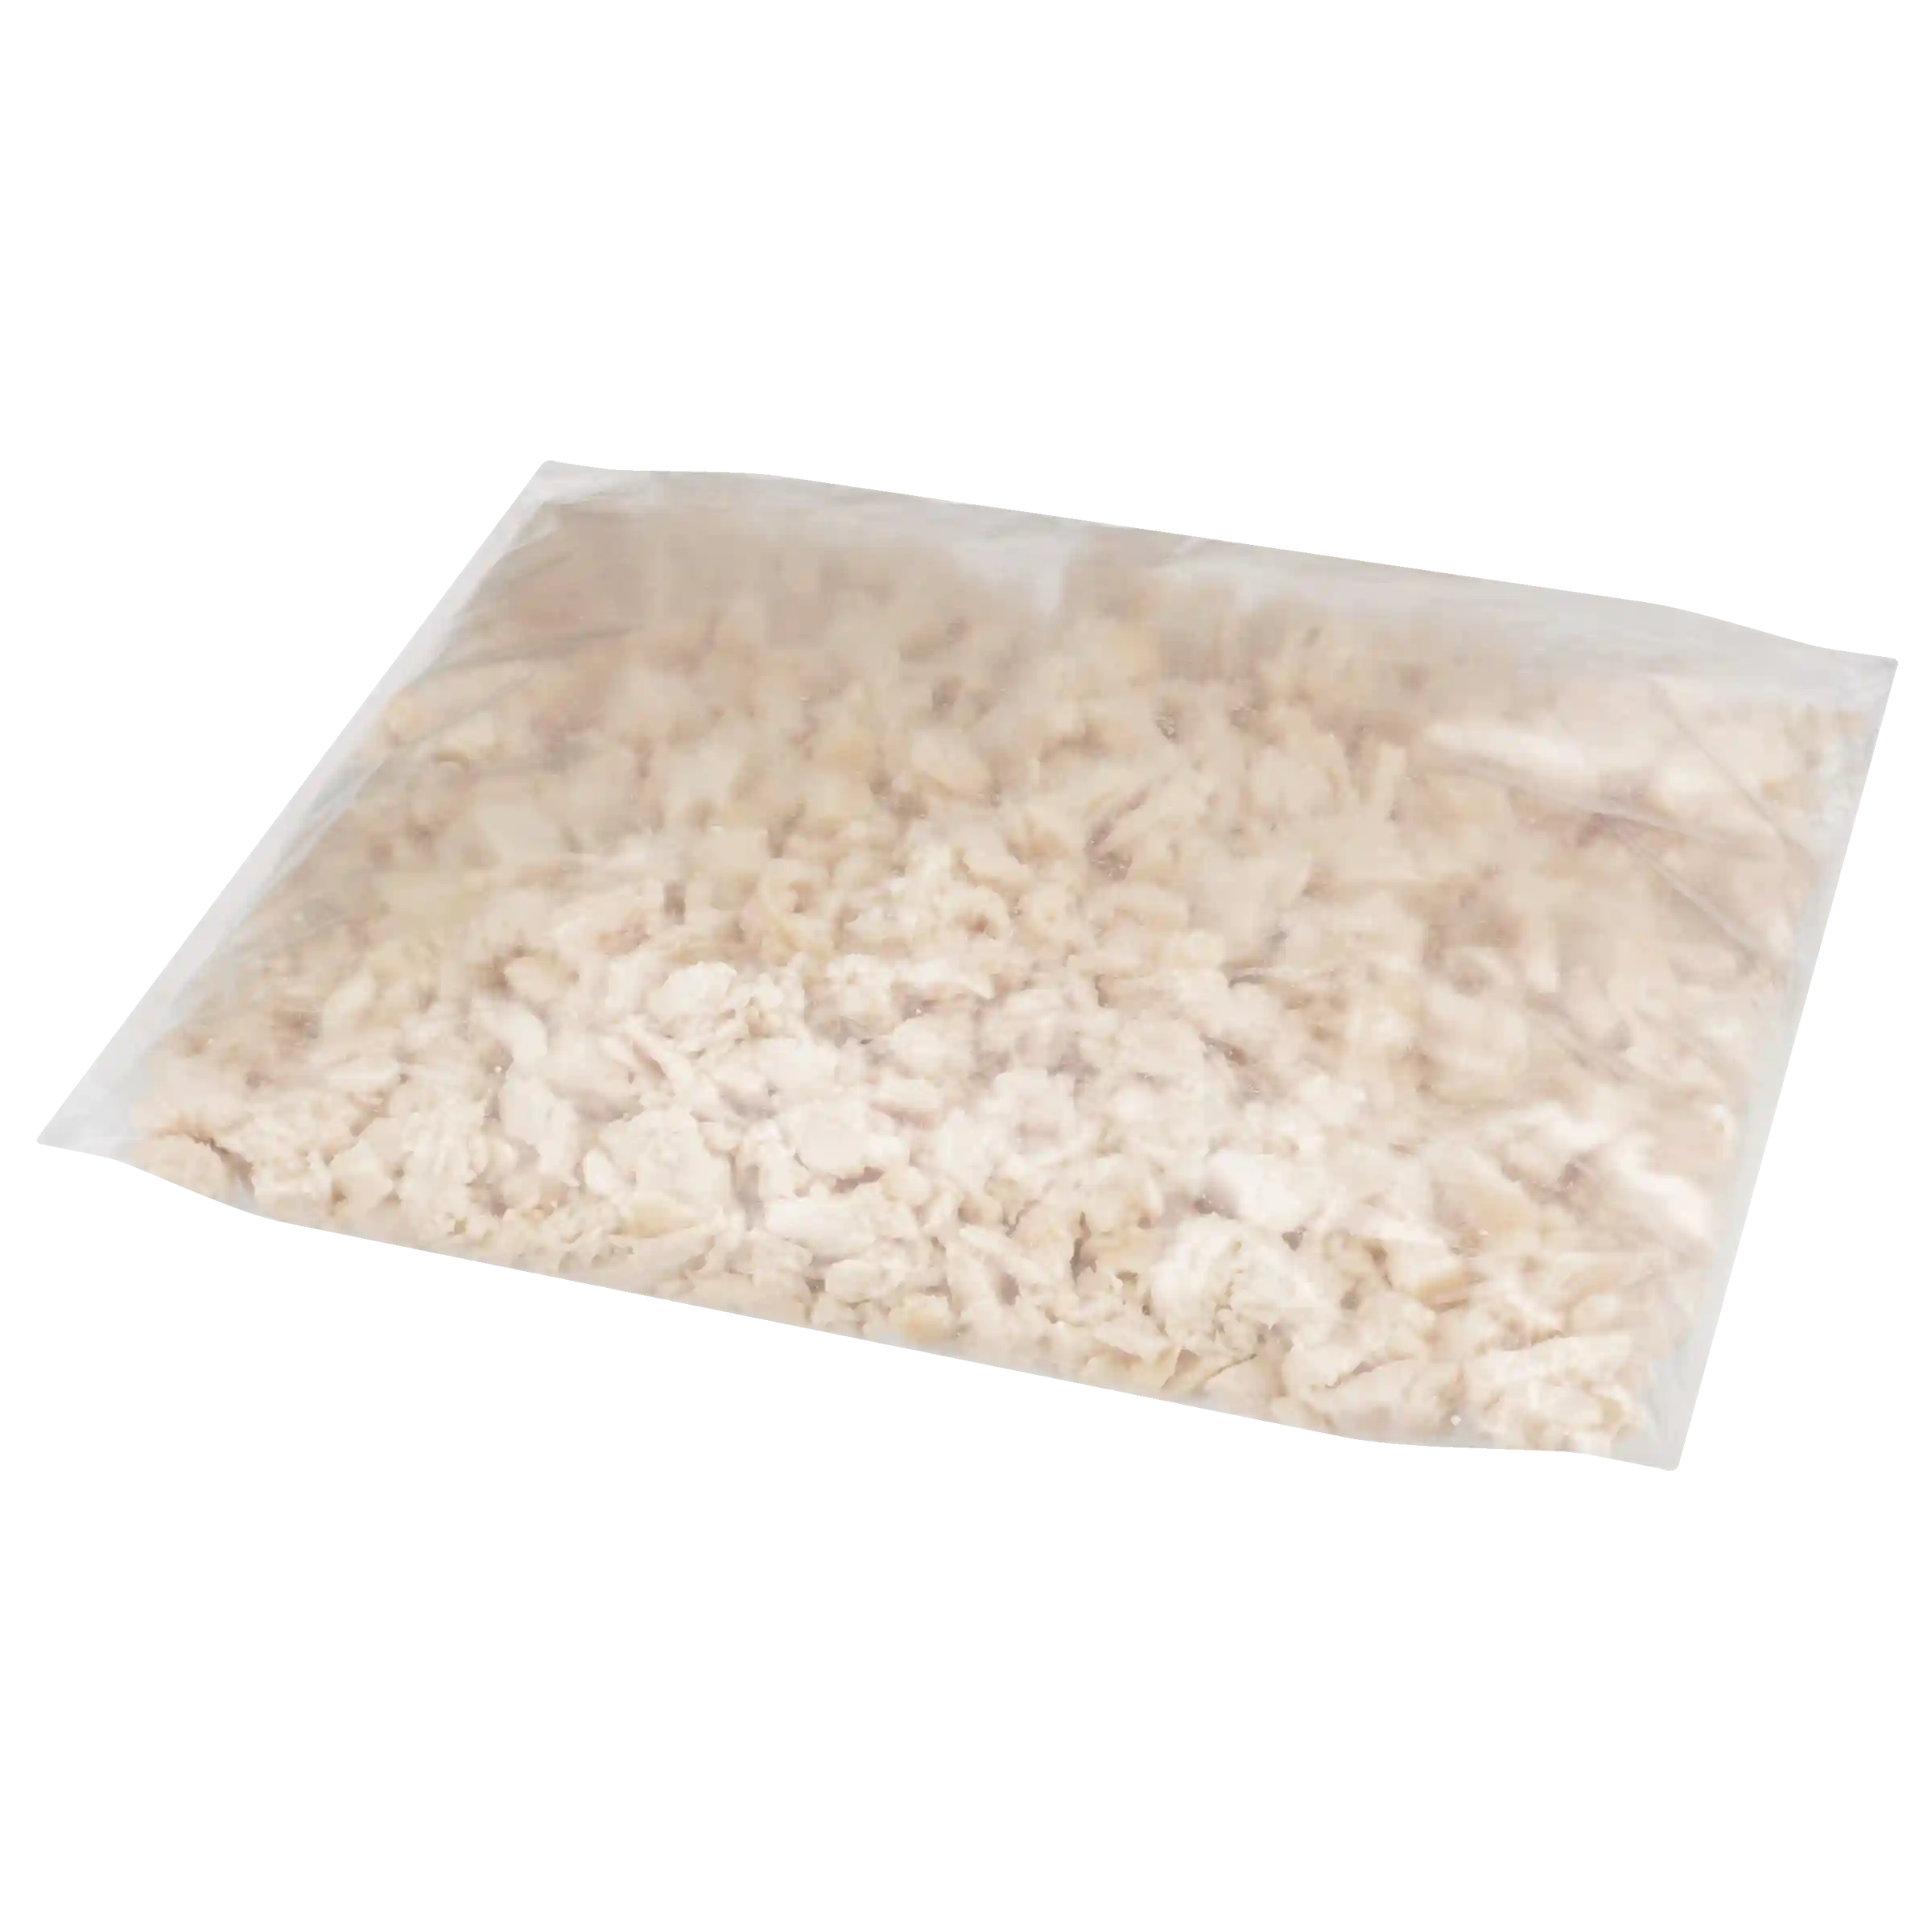 Tyson® Fully Cooked All Natural* Low Sodium Diced Chicken Breast, 0.5"_image_31